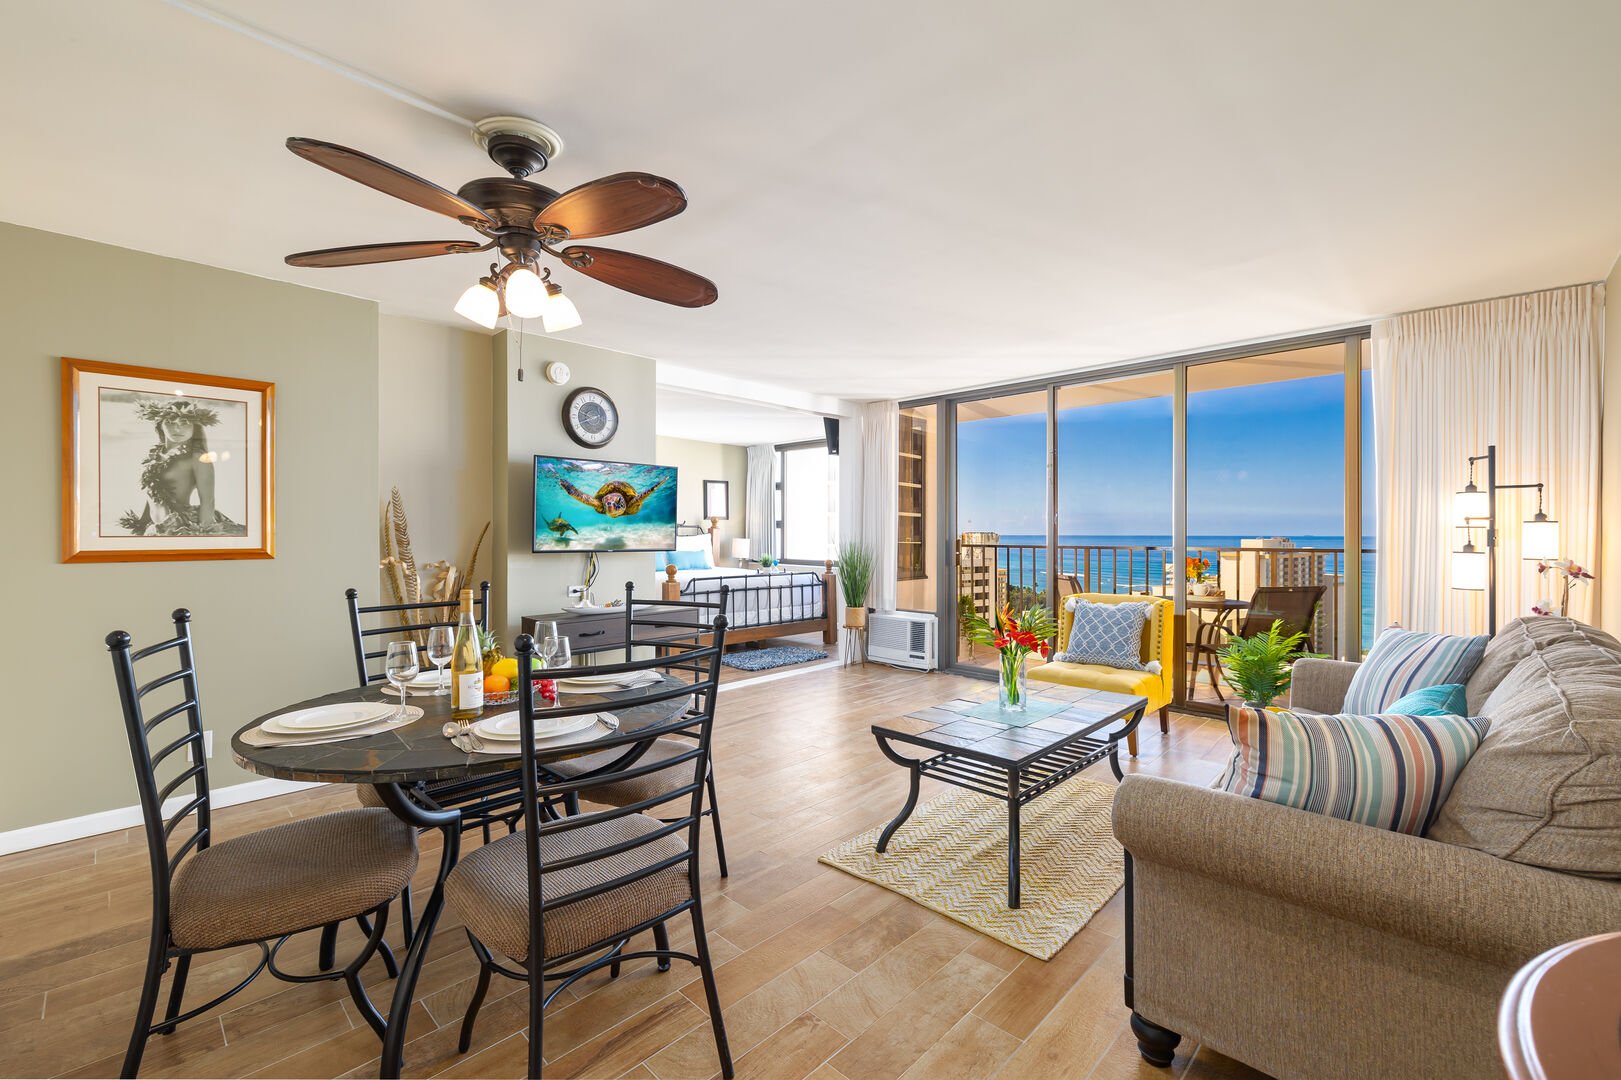 An overview of this beautiful condo with stunning ocean views.